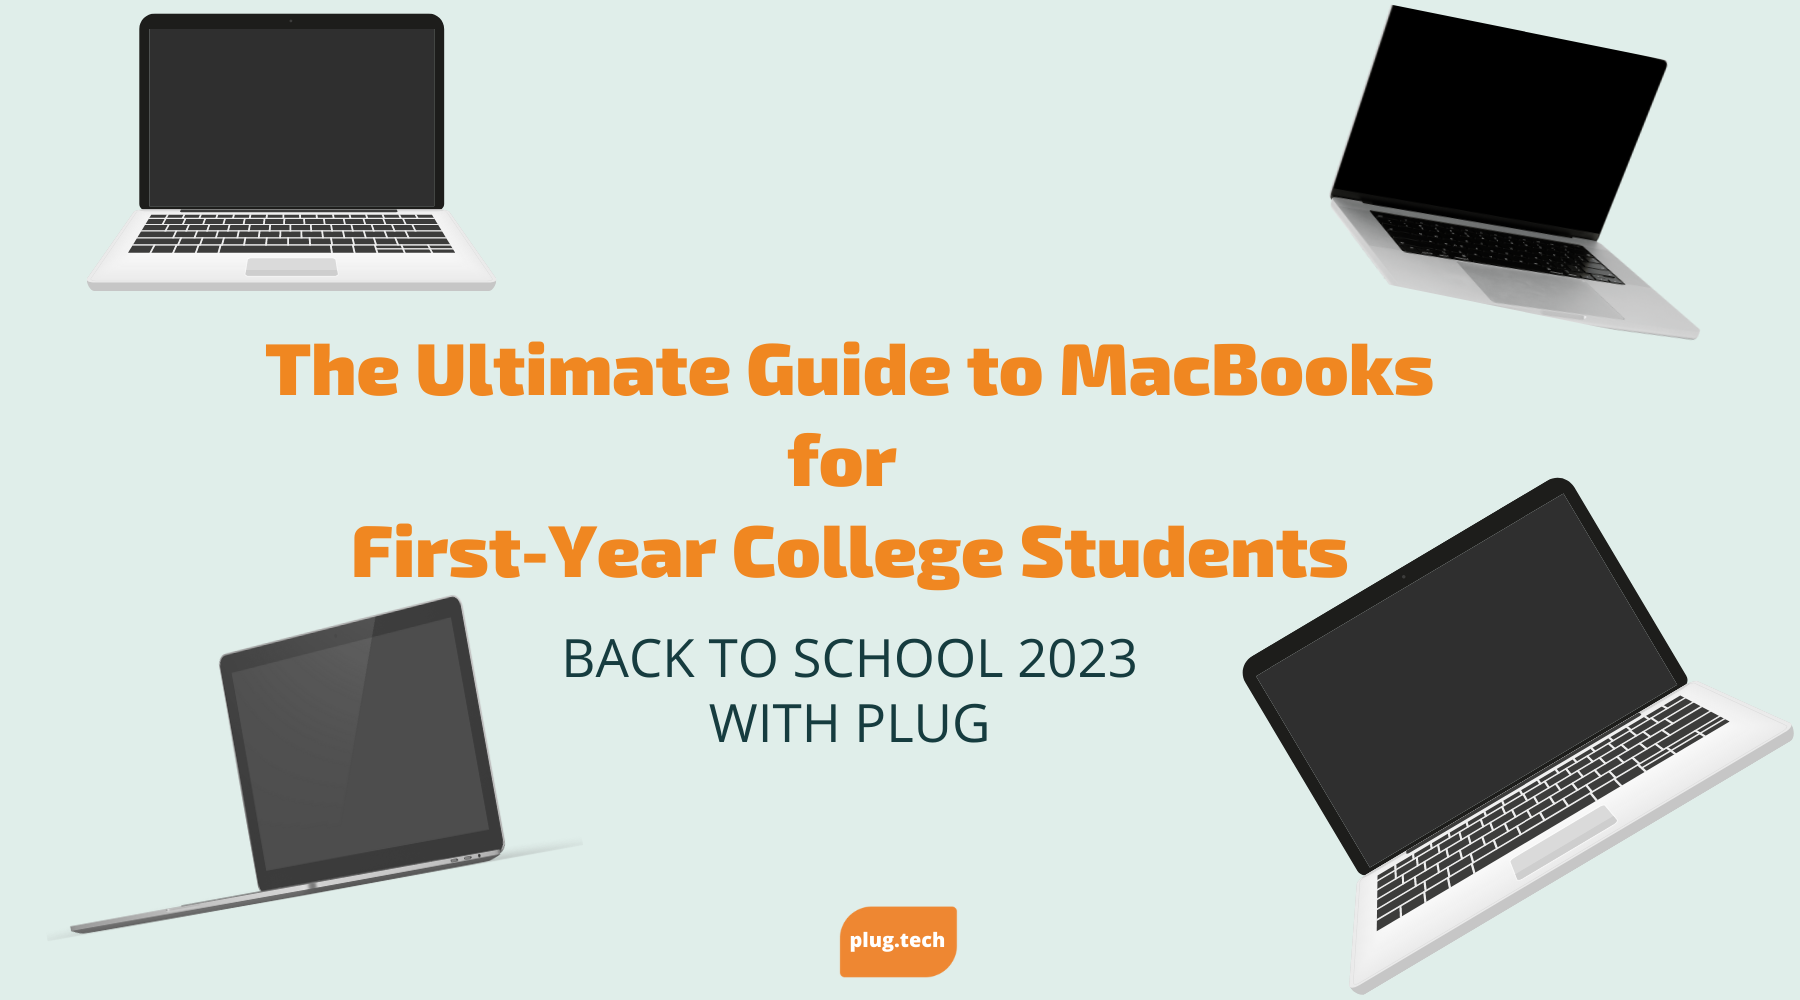 The Ultimate Guide to MacBooks for First-Year College Students